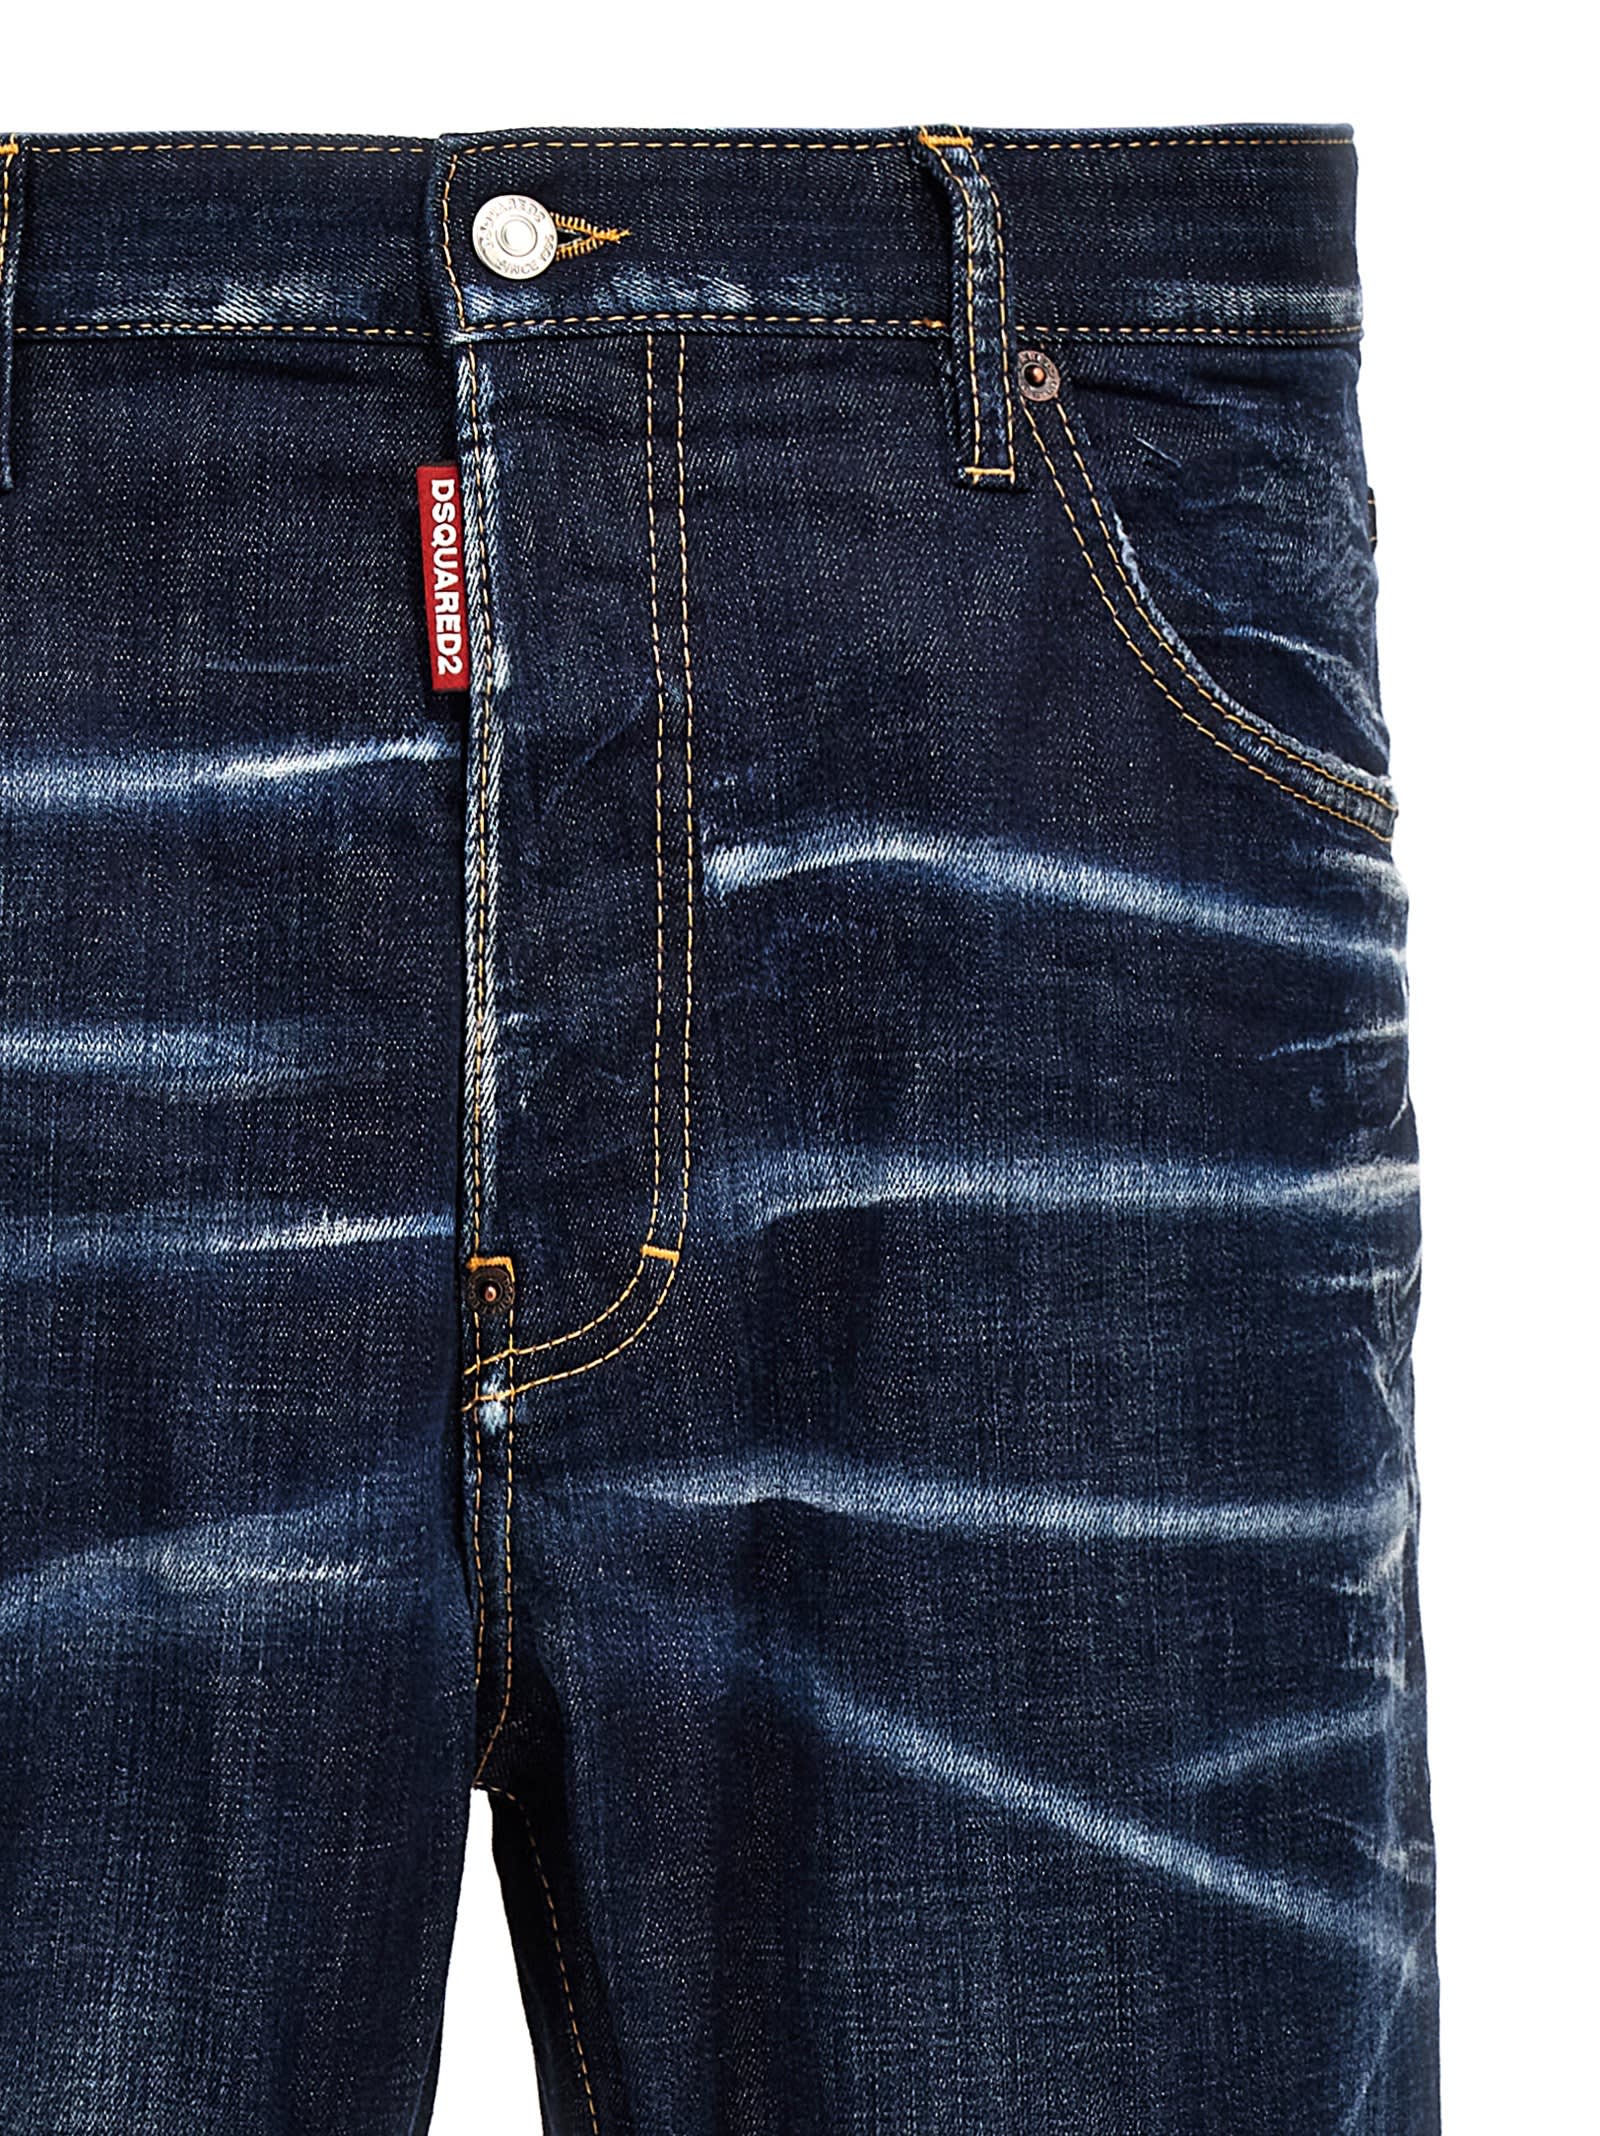 Shop Dsquared2 642 Jeans In Blue